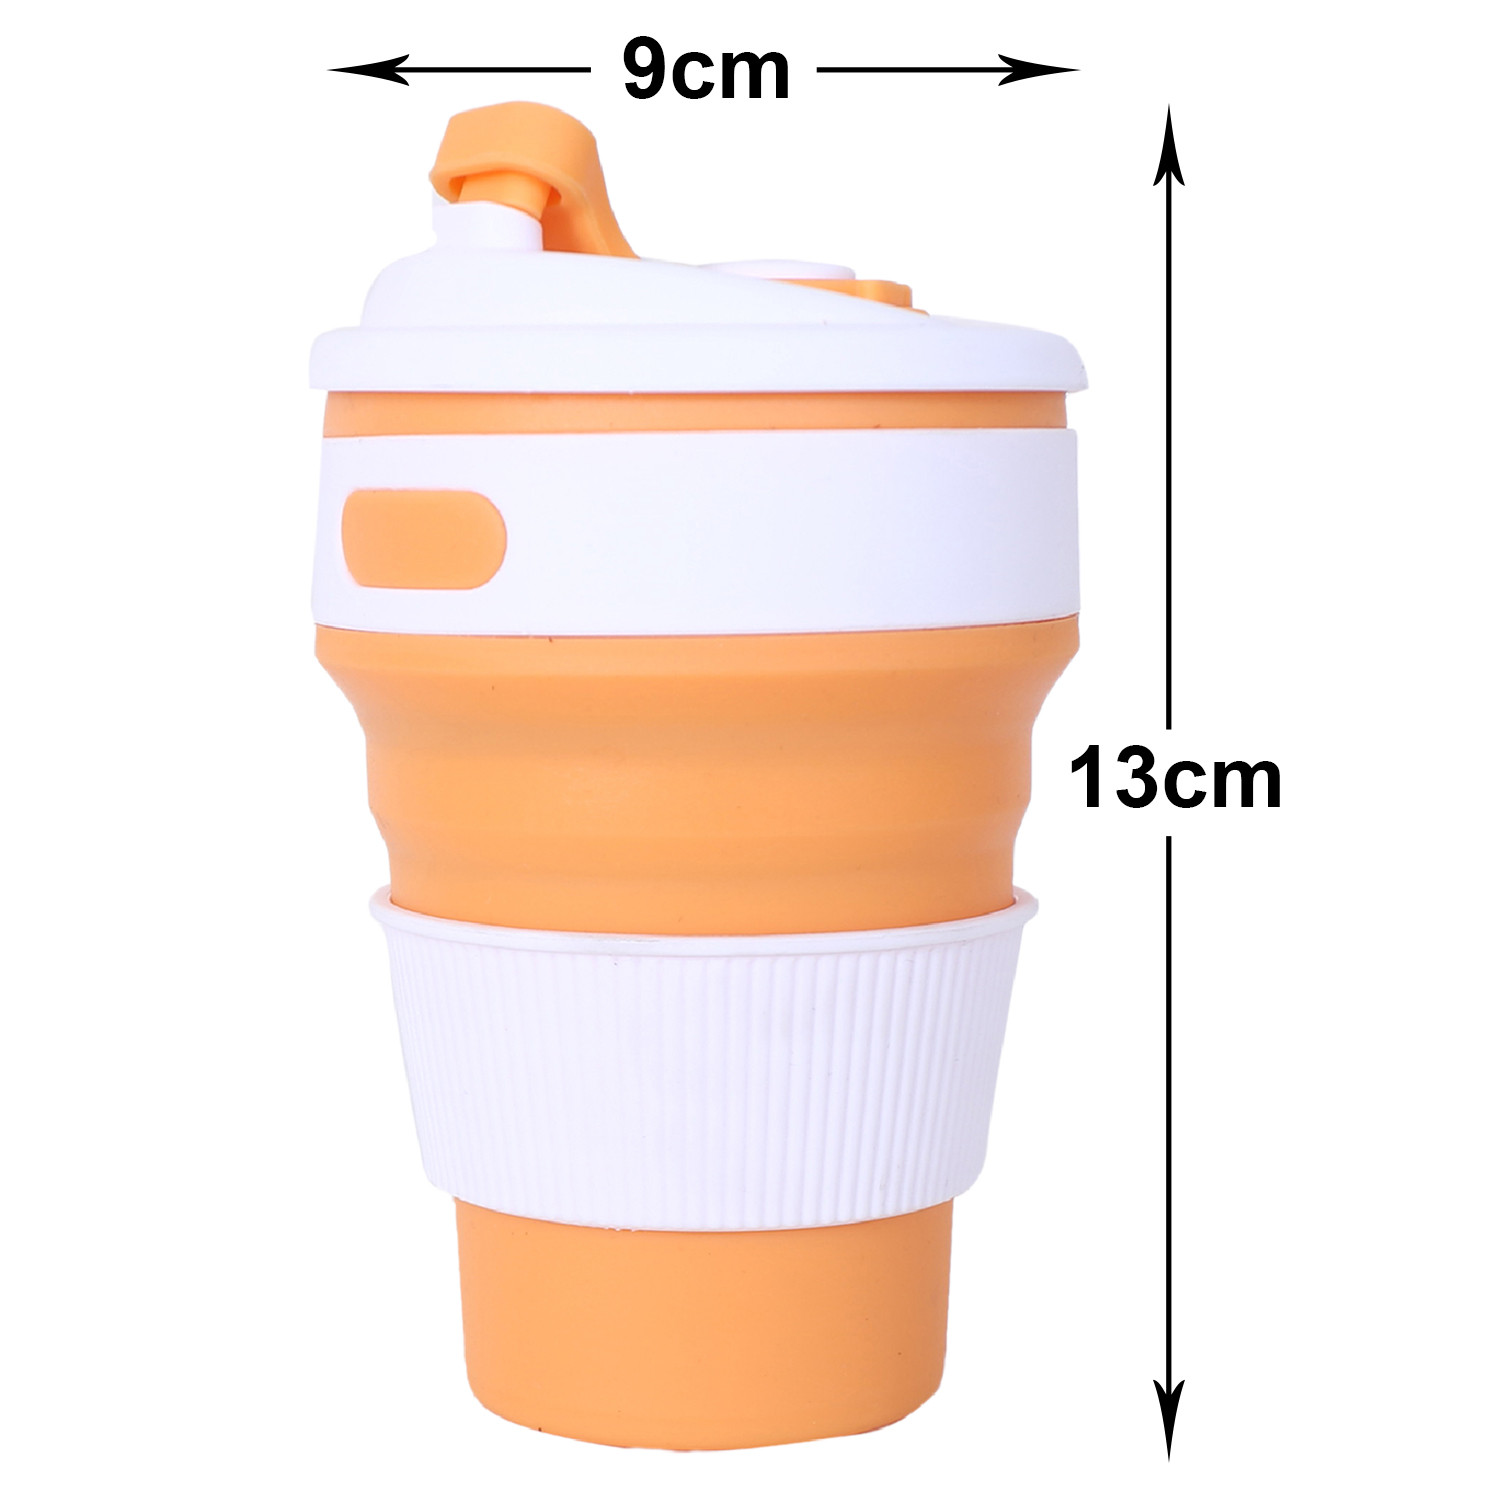 Kuber Industries Collapsible Coffee Cup|Silicone Portable Travel Coffee Mug|Camping Cup with Lid for Travel,Hiking Outdoors,350 ML,(Orange)